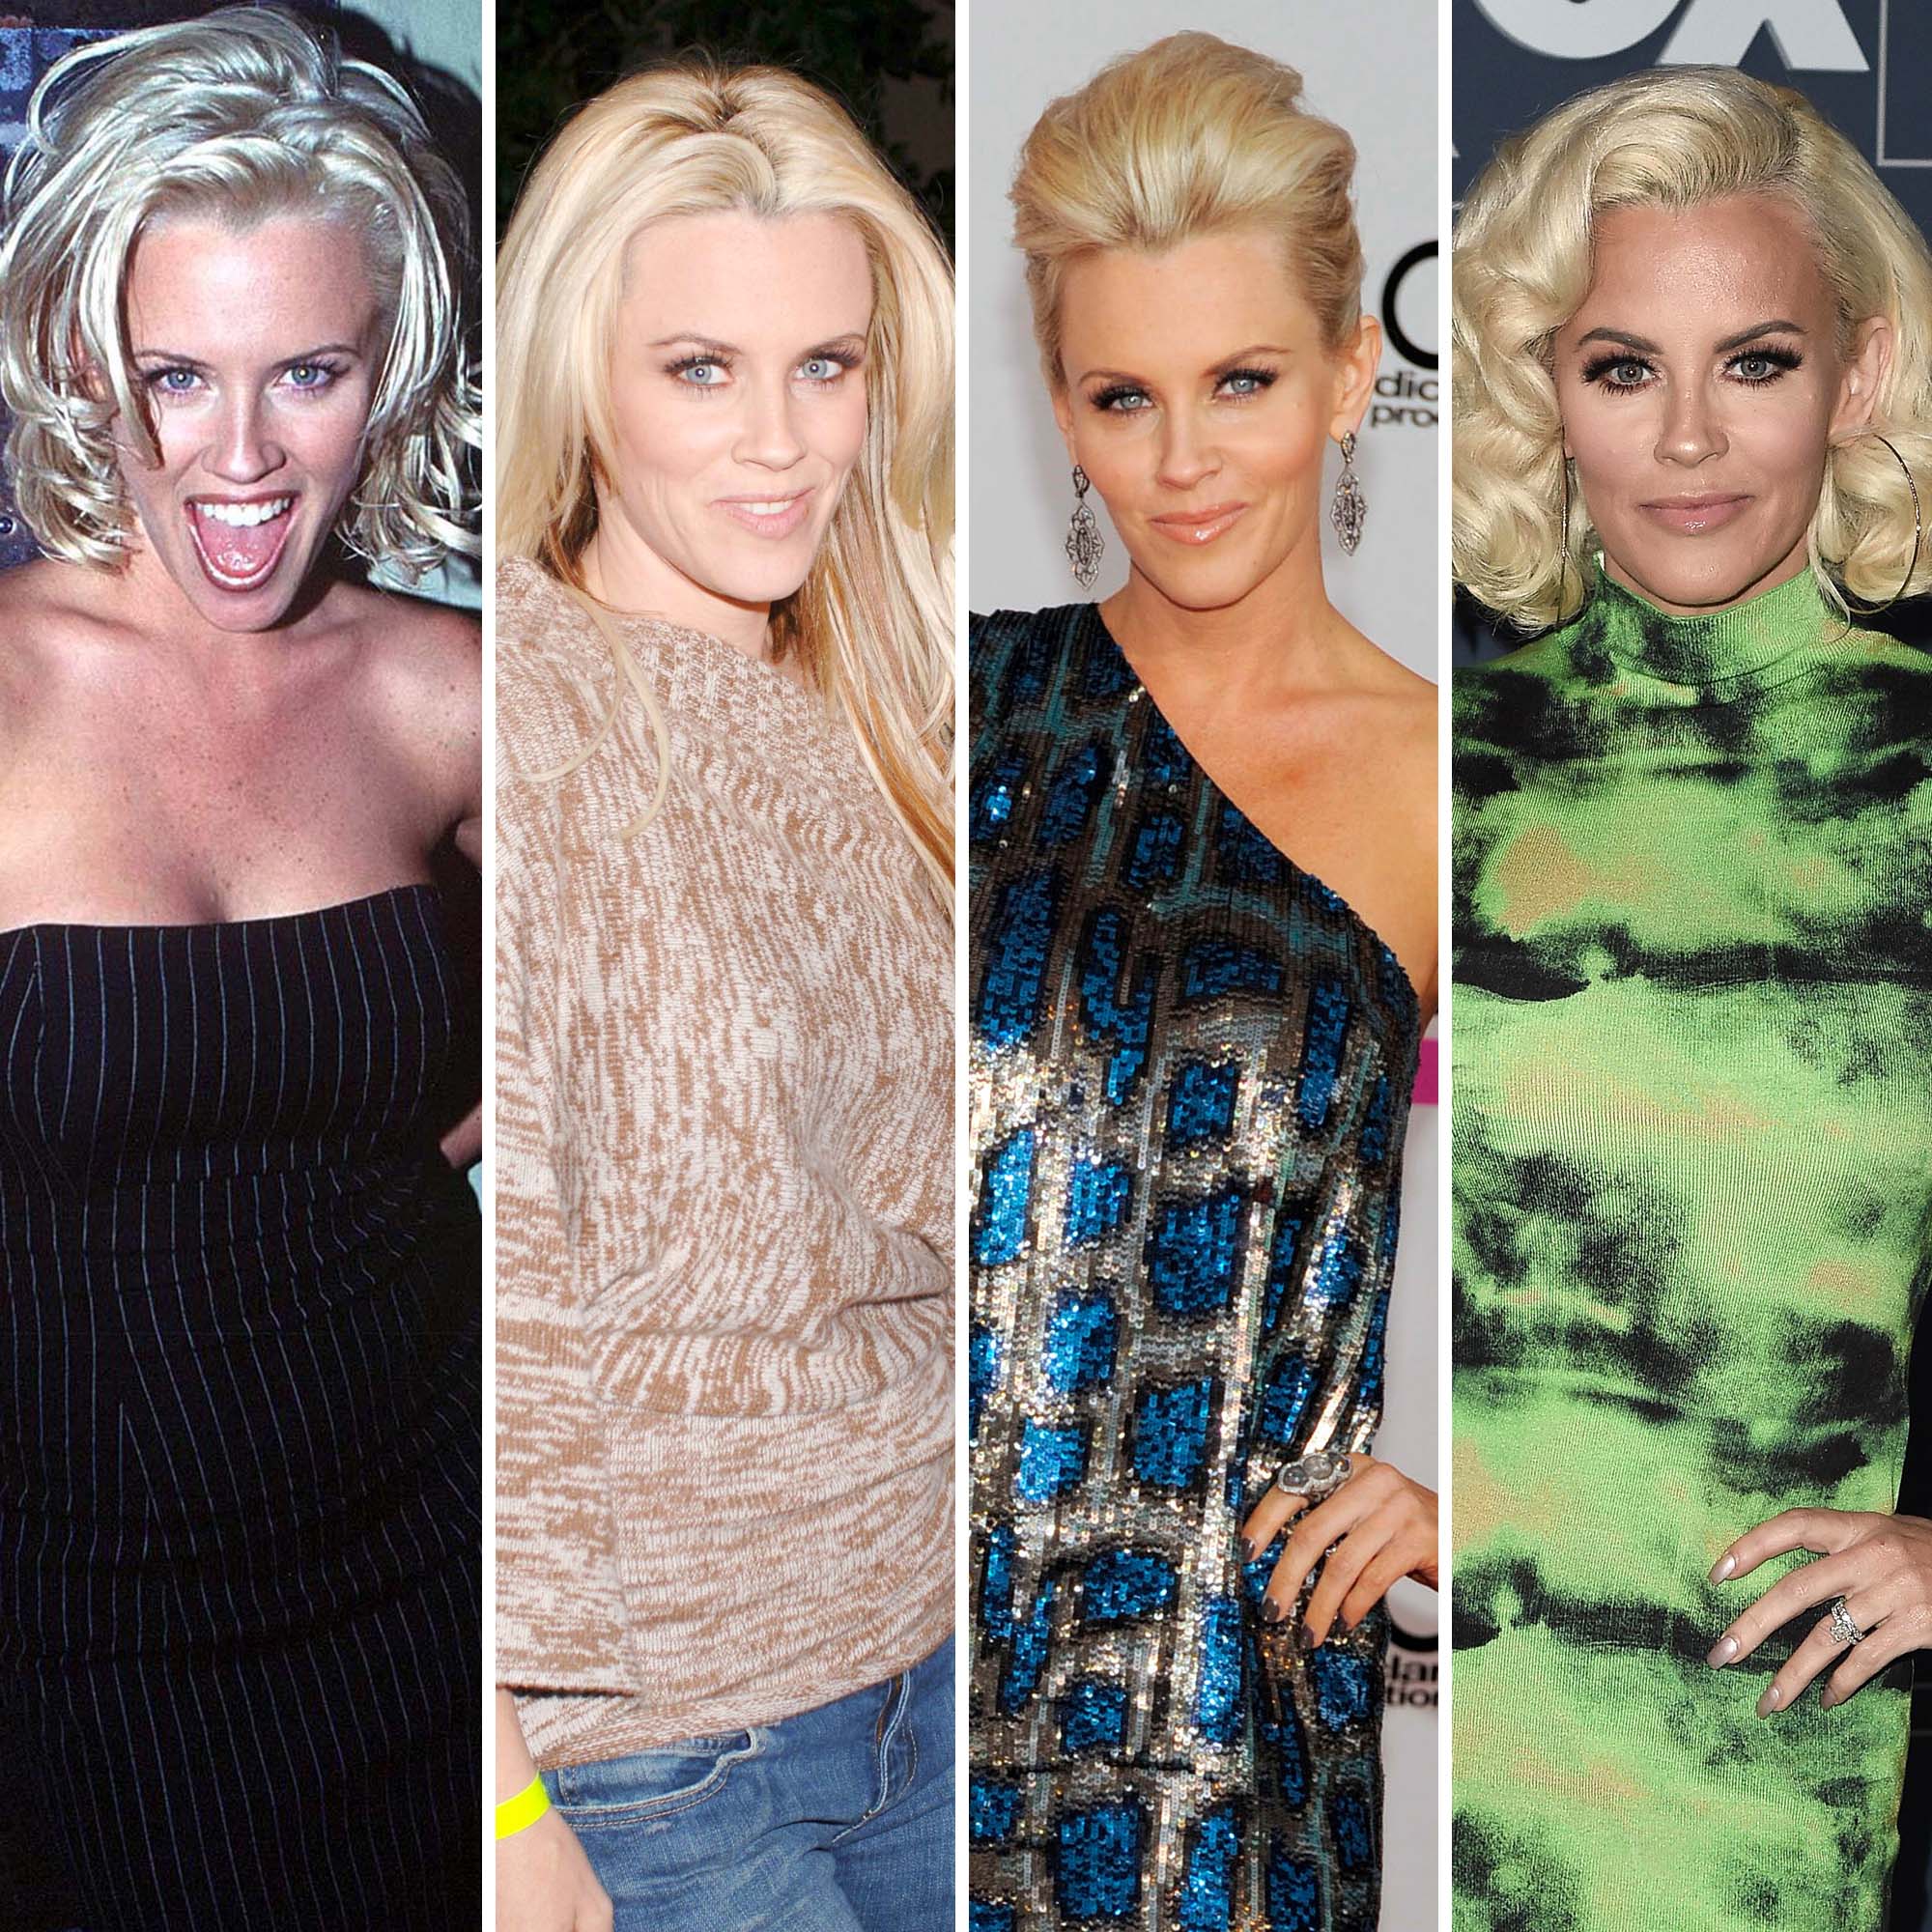 bryan mitchusson recommends jenny mccarthy black hair pic